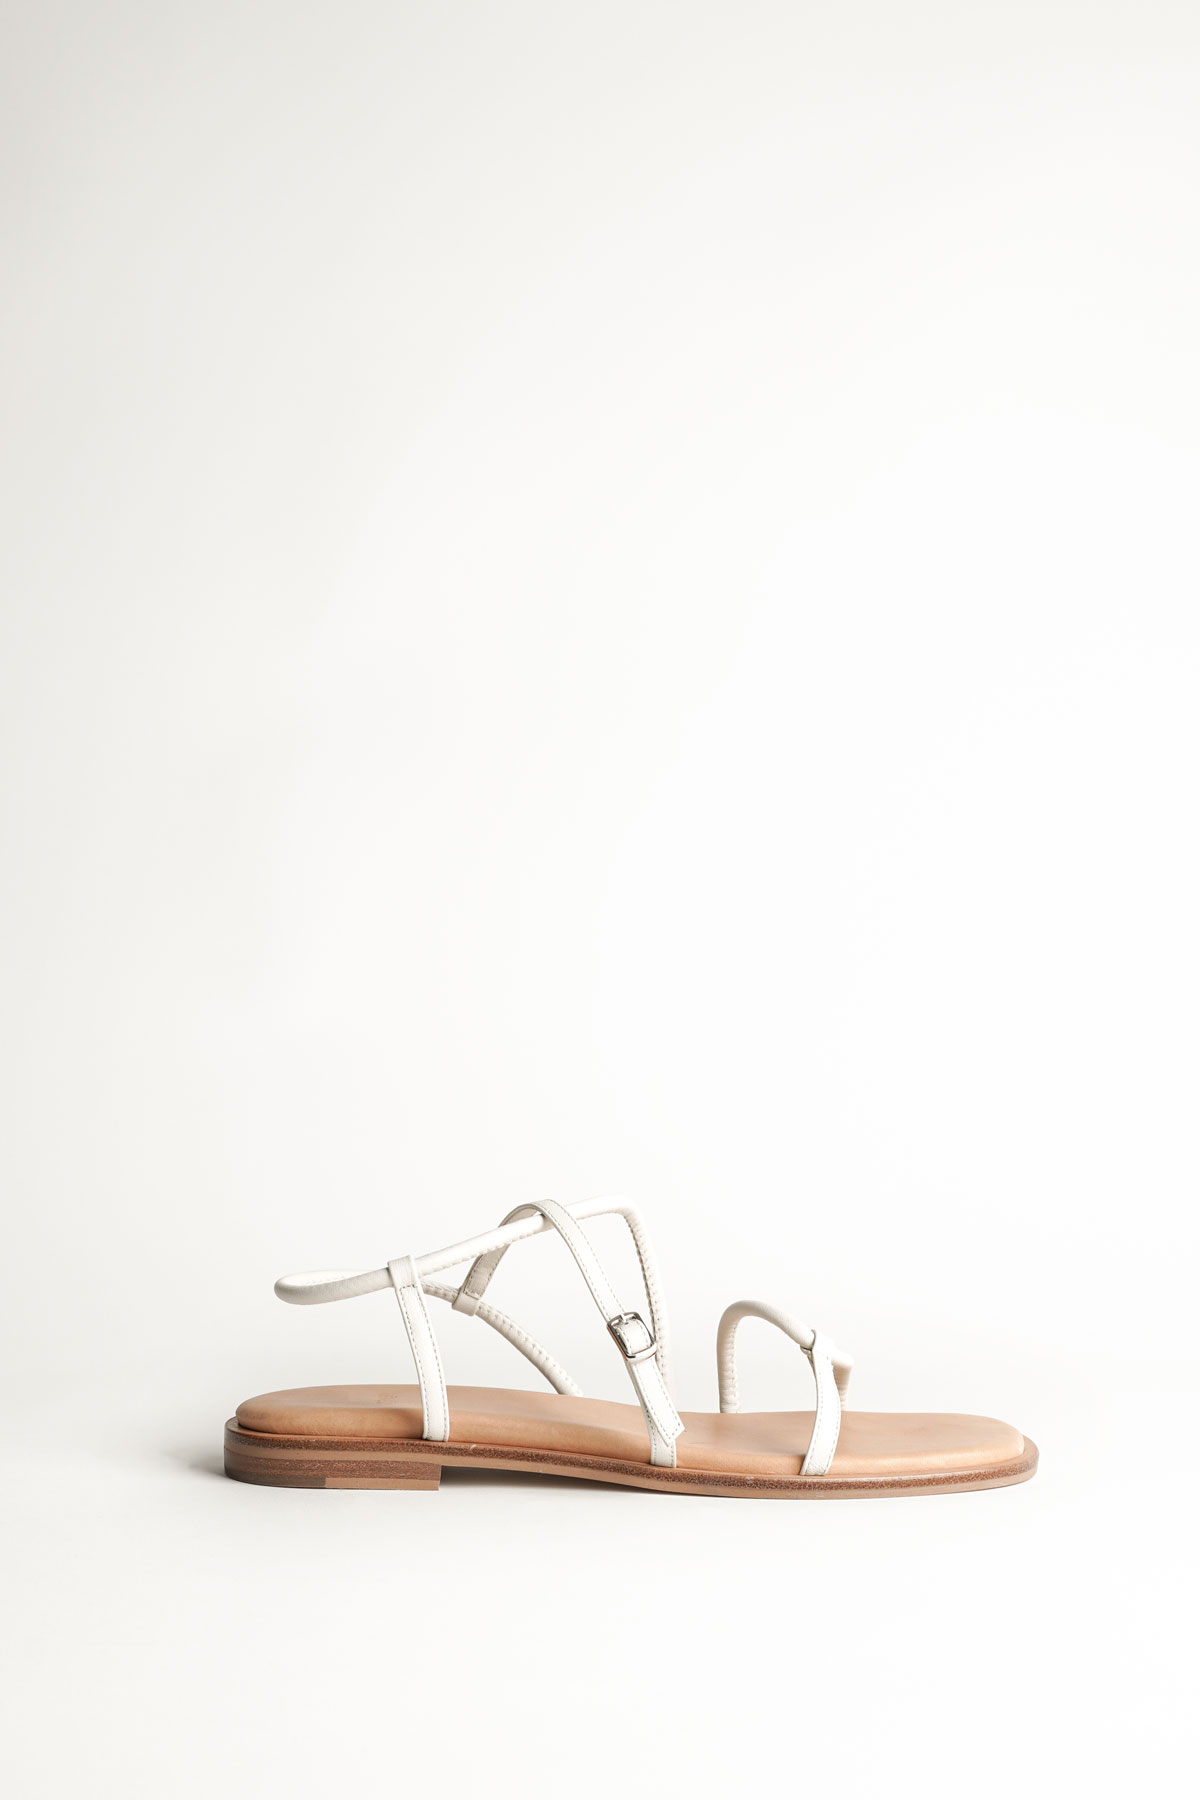 00_ROPE STRAP-LEATHER SANDAL OFF WHITE